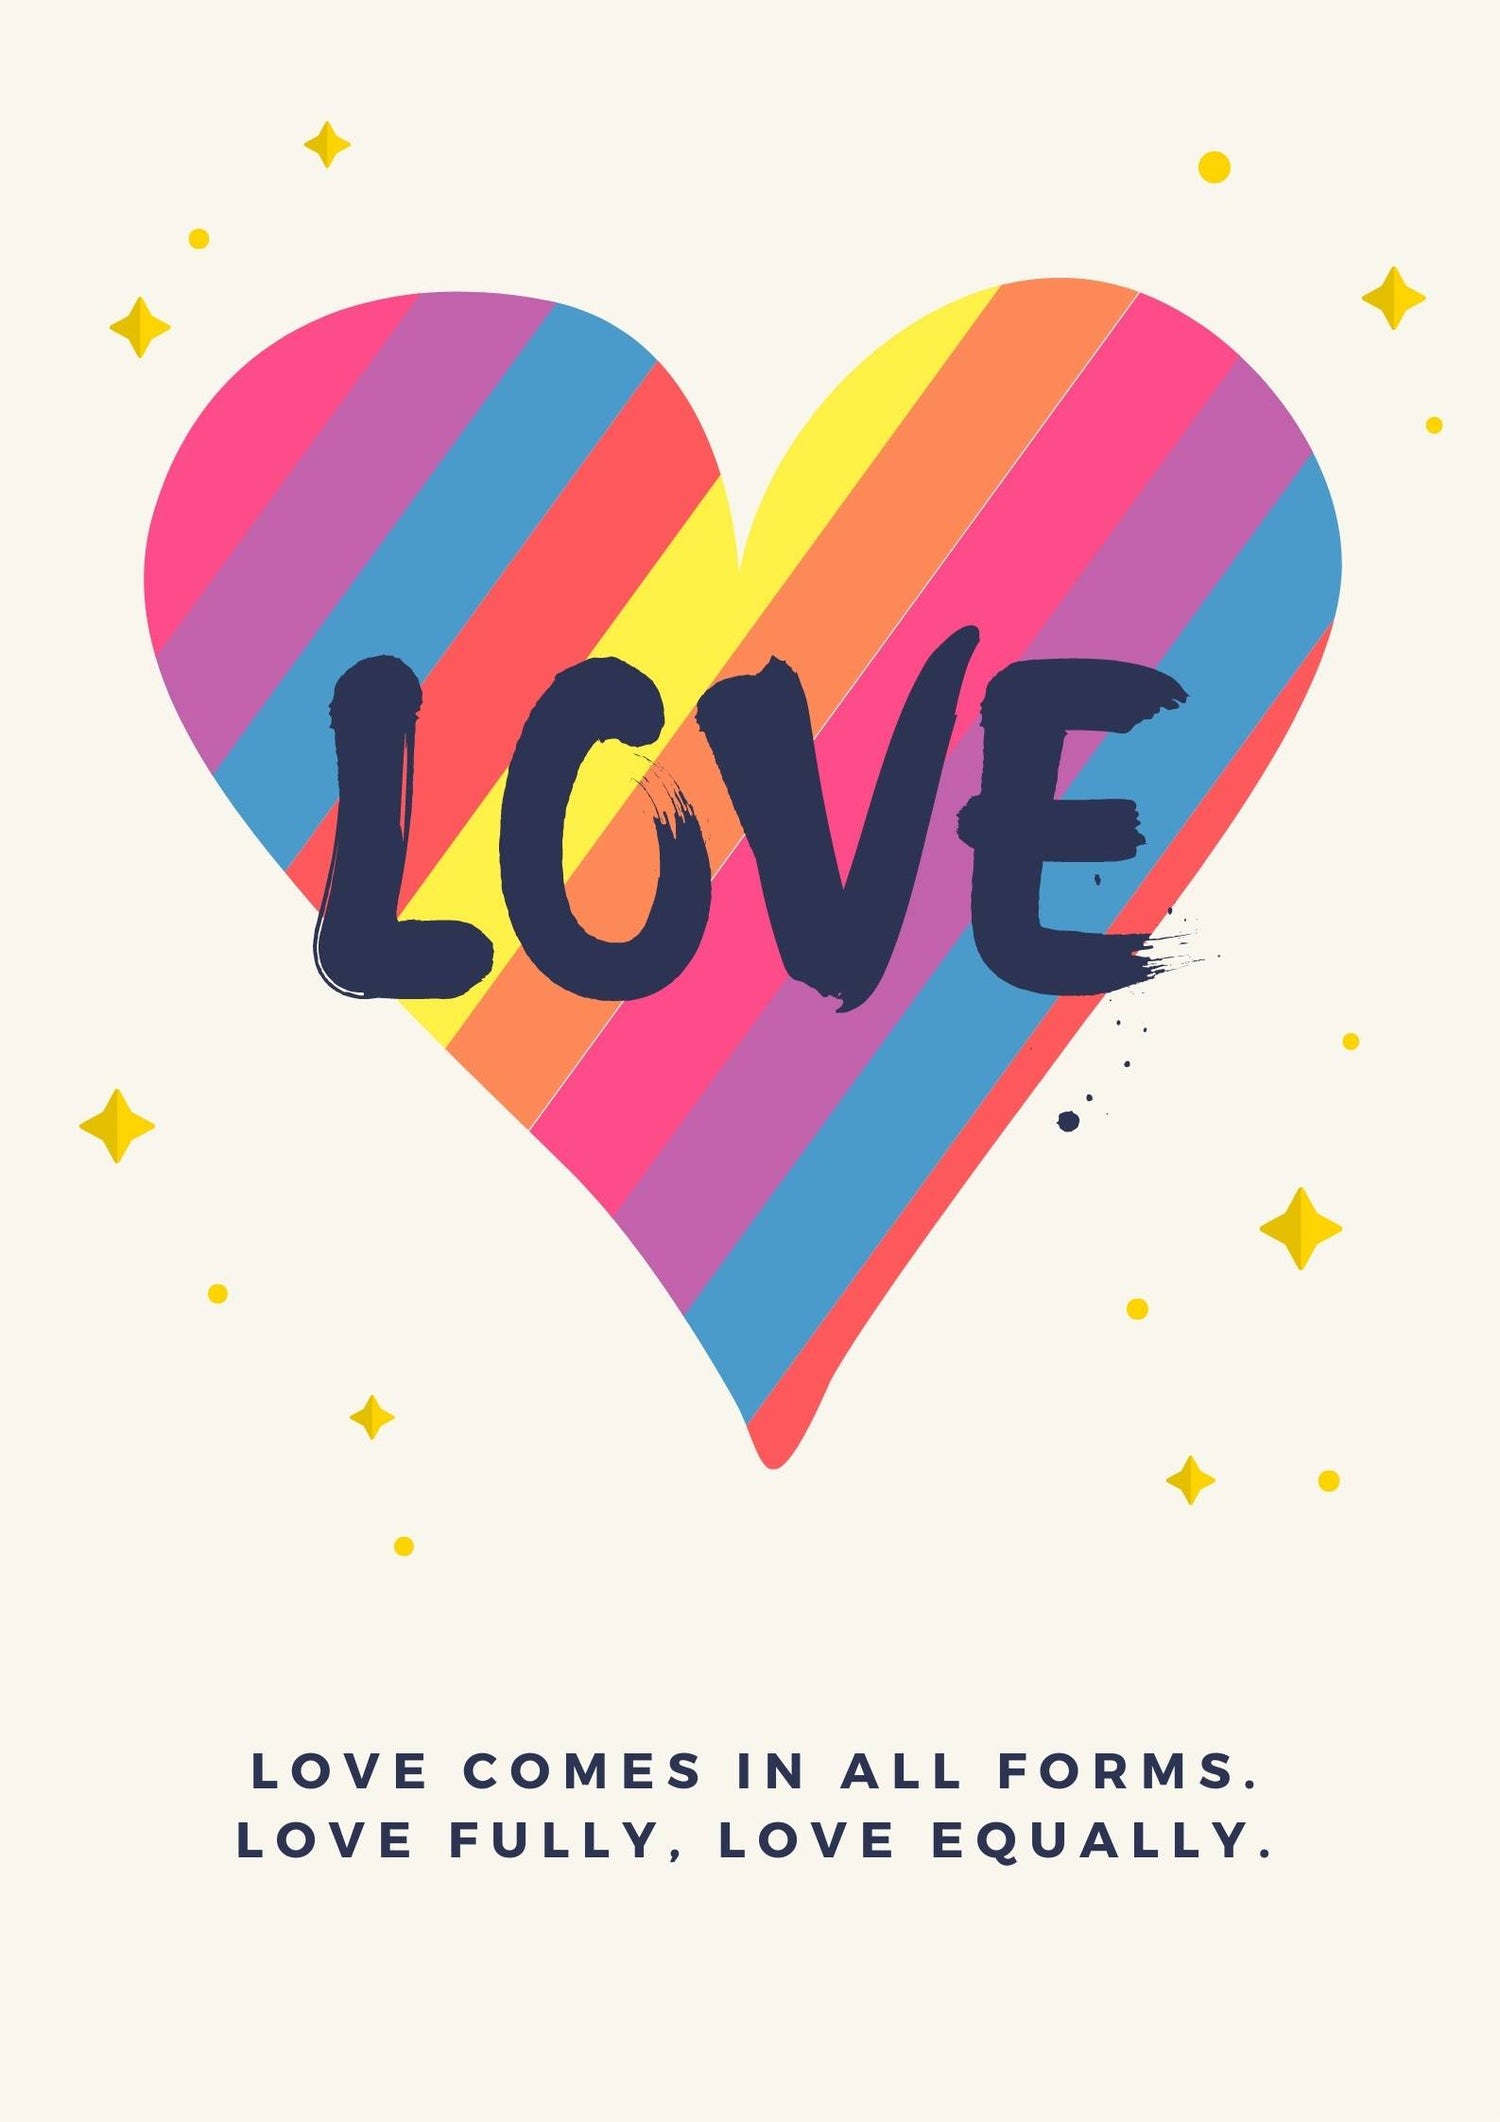 It is a poster with a big rainbow heart with Love written on it in big bold letter. A small text is written at the bottom of the image- Love comes in all forms. Love fully. Love Equally.